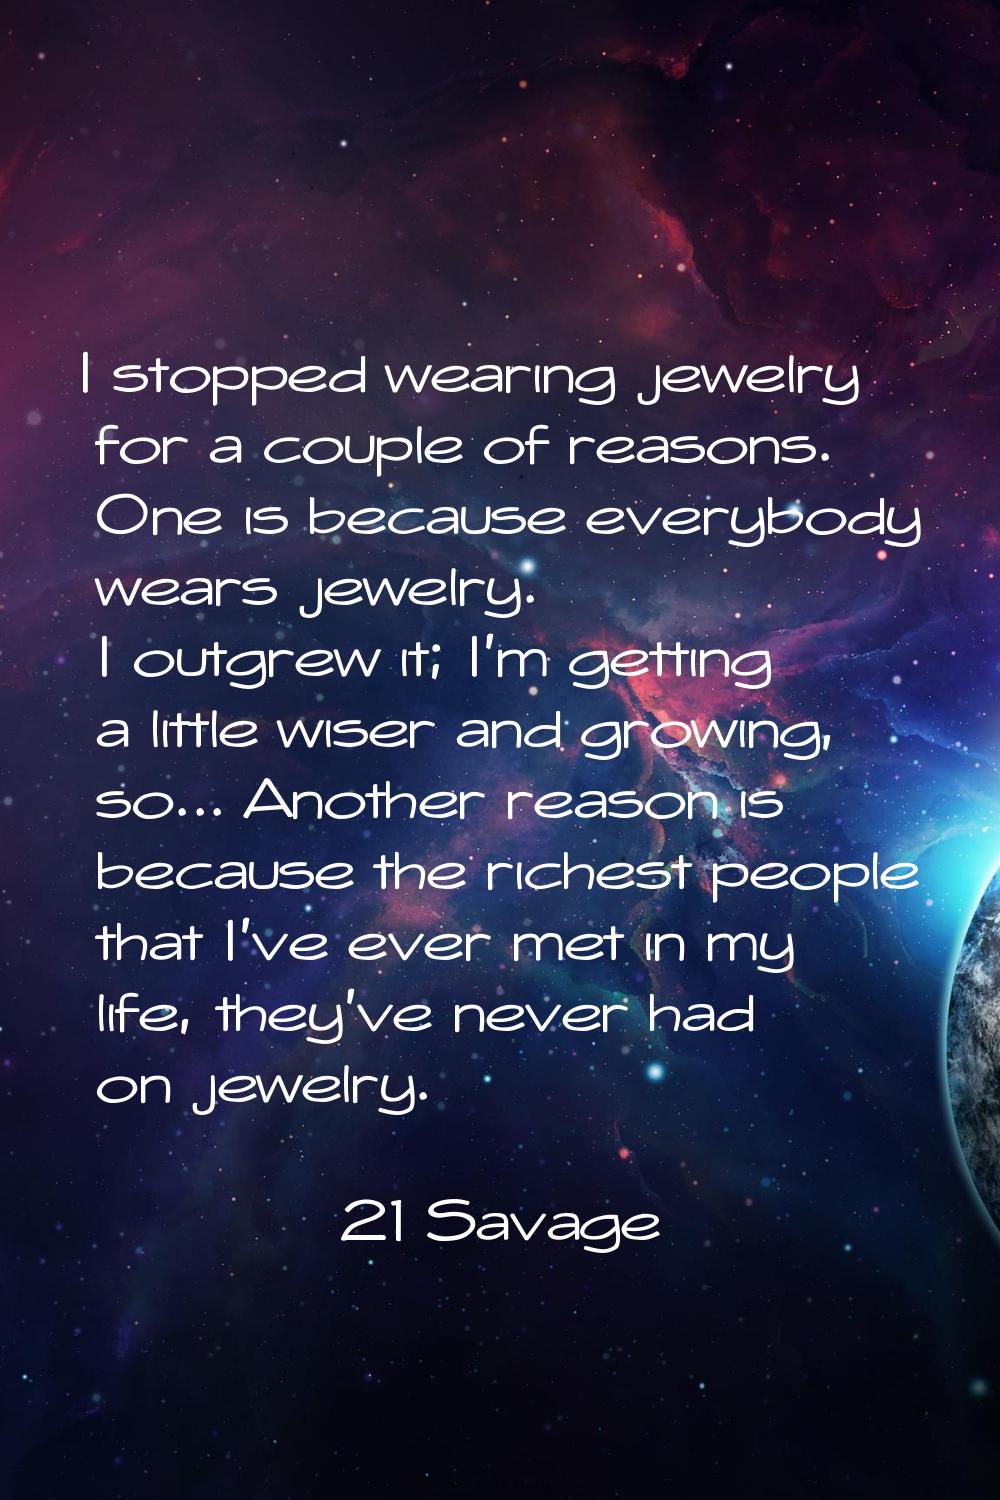 I stopped wearing jewelry for a couple of reasons. One is because everybody wears jewelry. I outgre